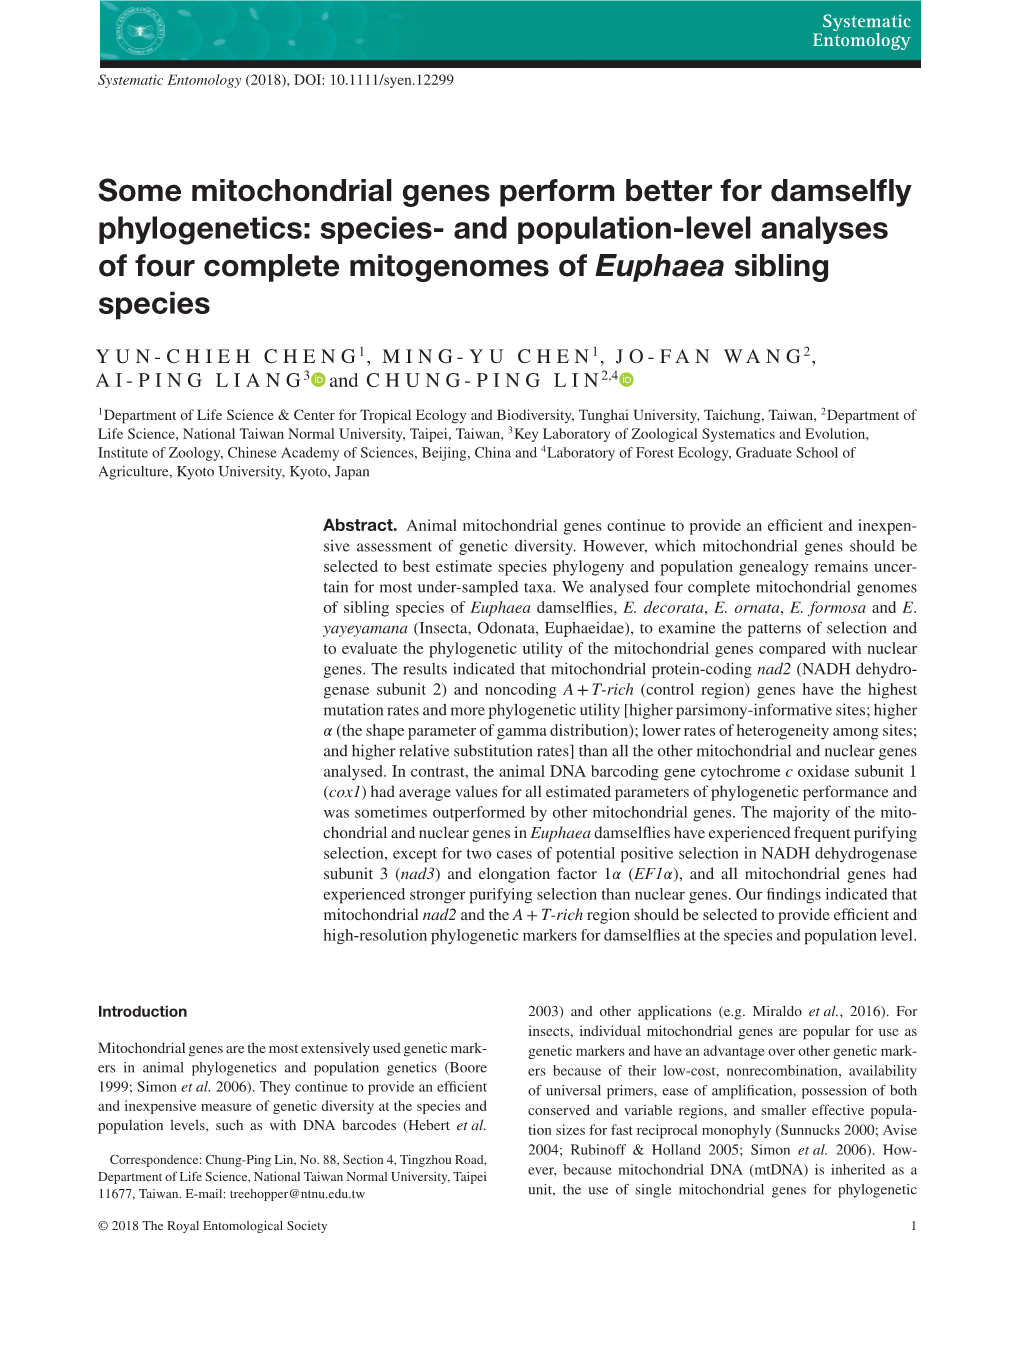 Some Mitochondrial Genes Perform Better for Damselfly Phylogenetics